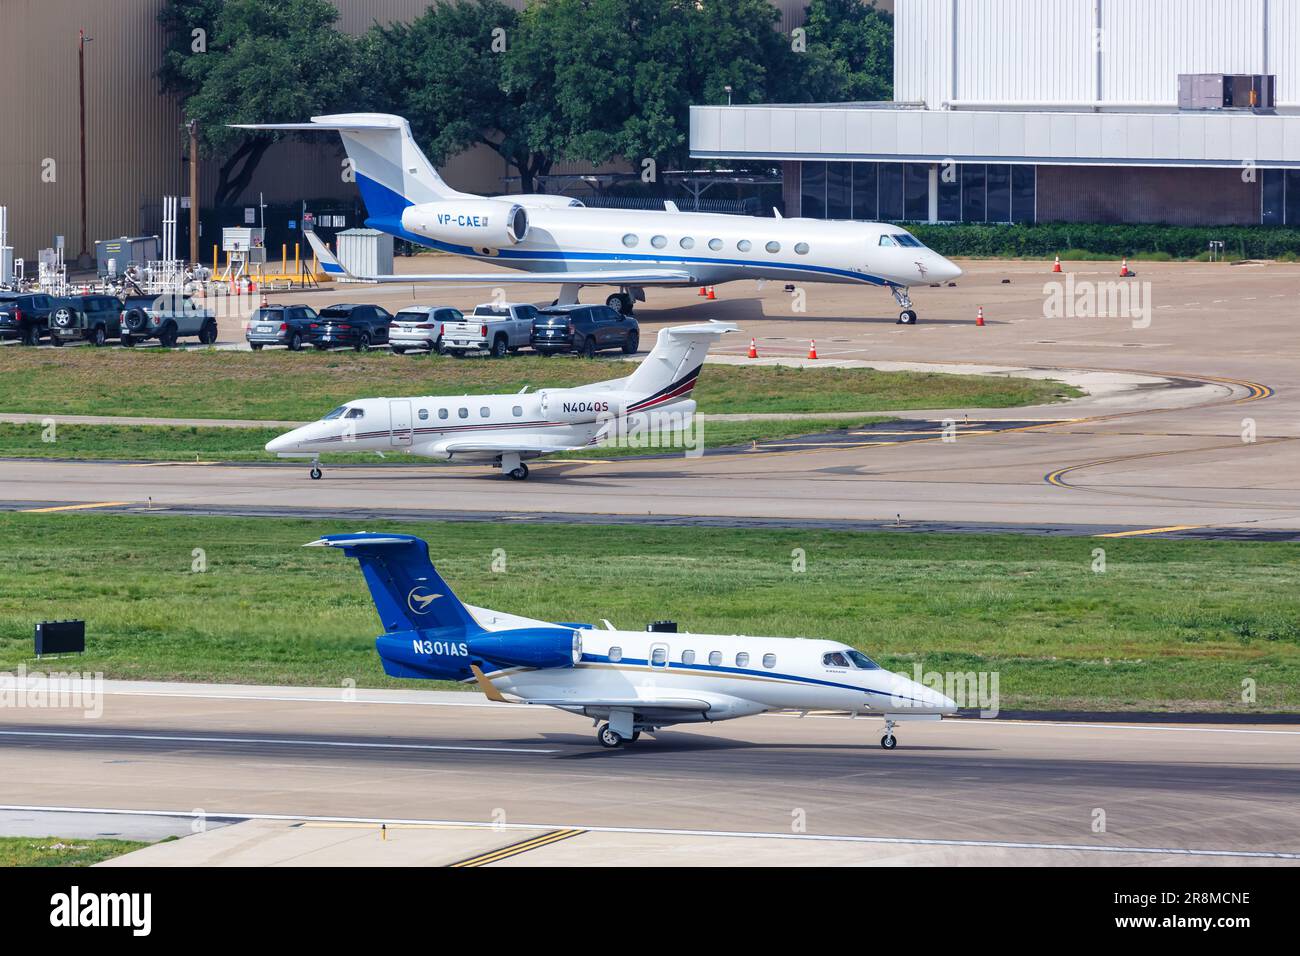 Dallas, United States - May 7, 2023: Embraer Phenom 300 and Gulfstream G550 private jets airplanes at Dallas Love Field Airport (DAL) in the United St Stock Photo